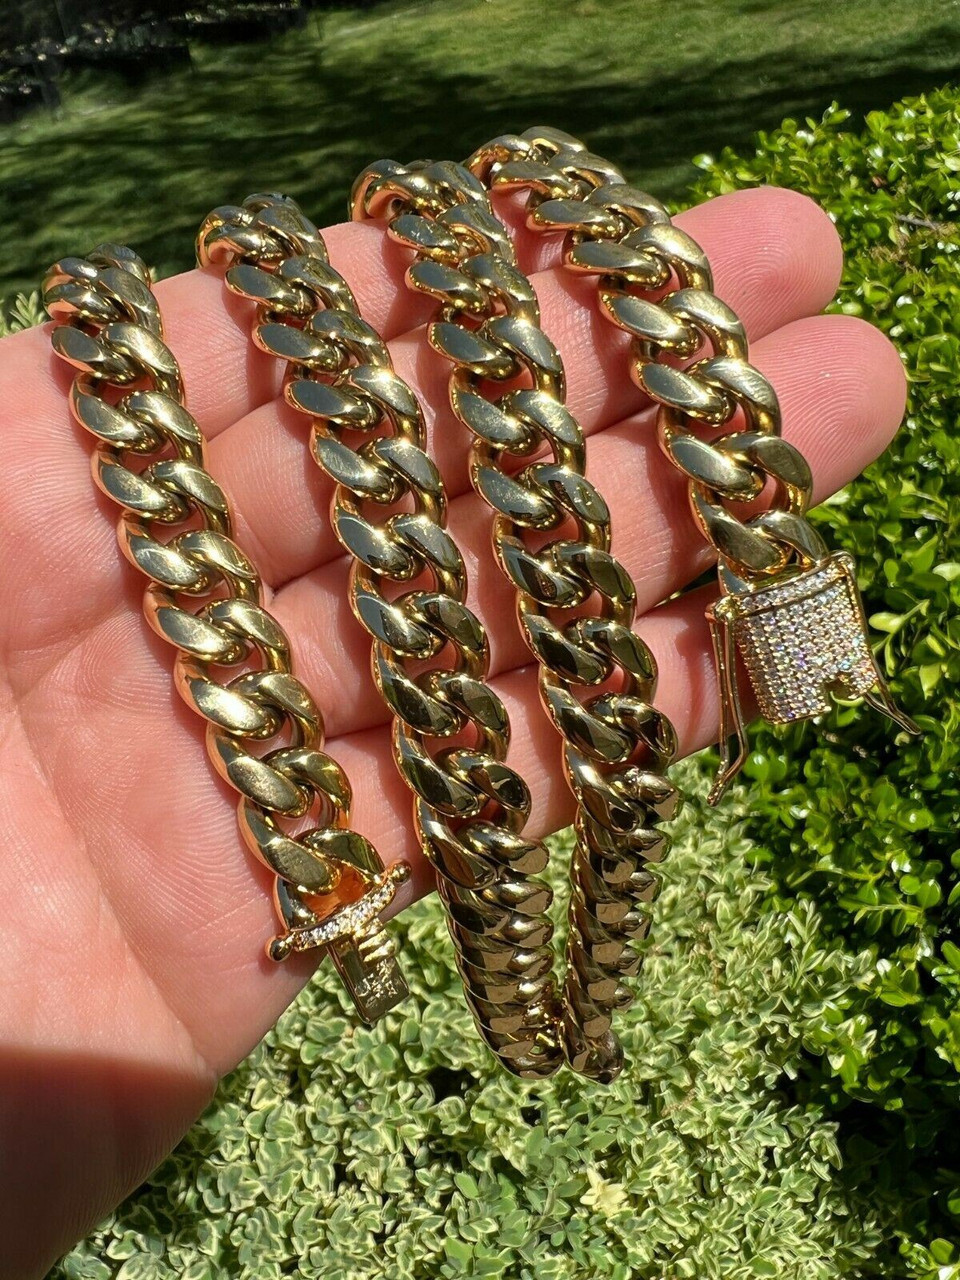 Get cold Pure condenser real miami cuban link chain clarity